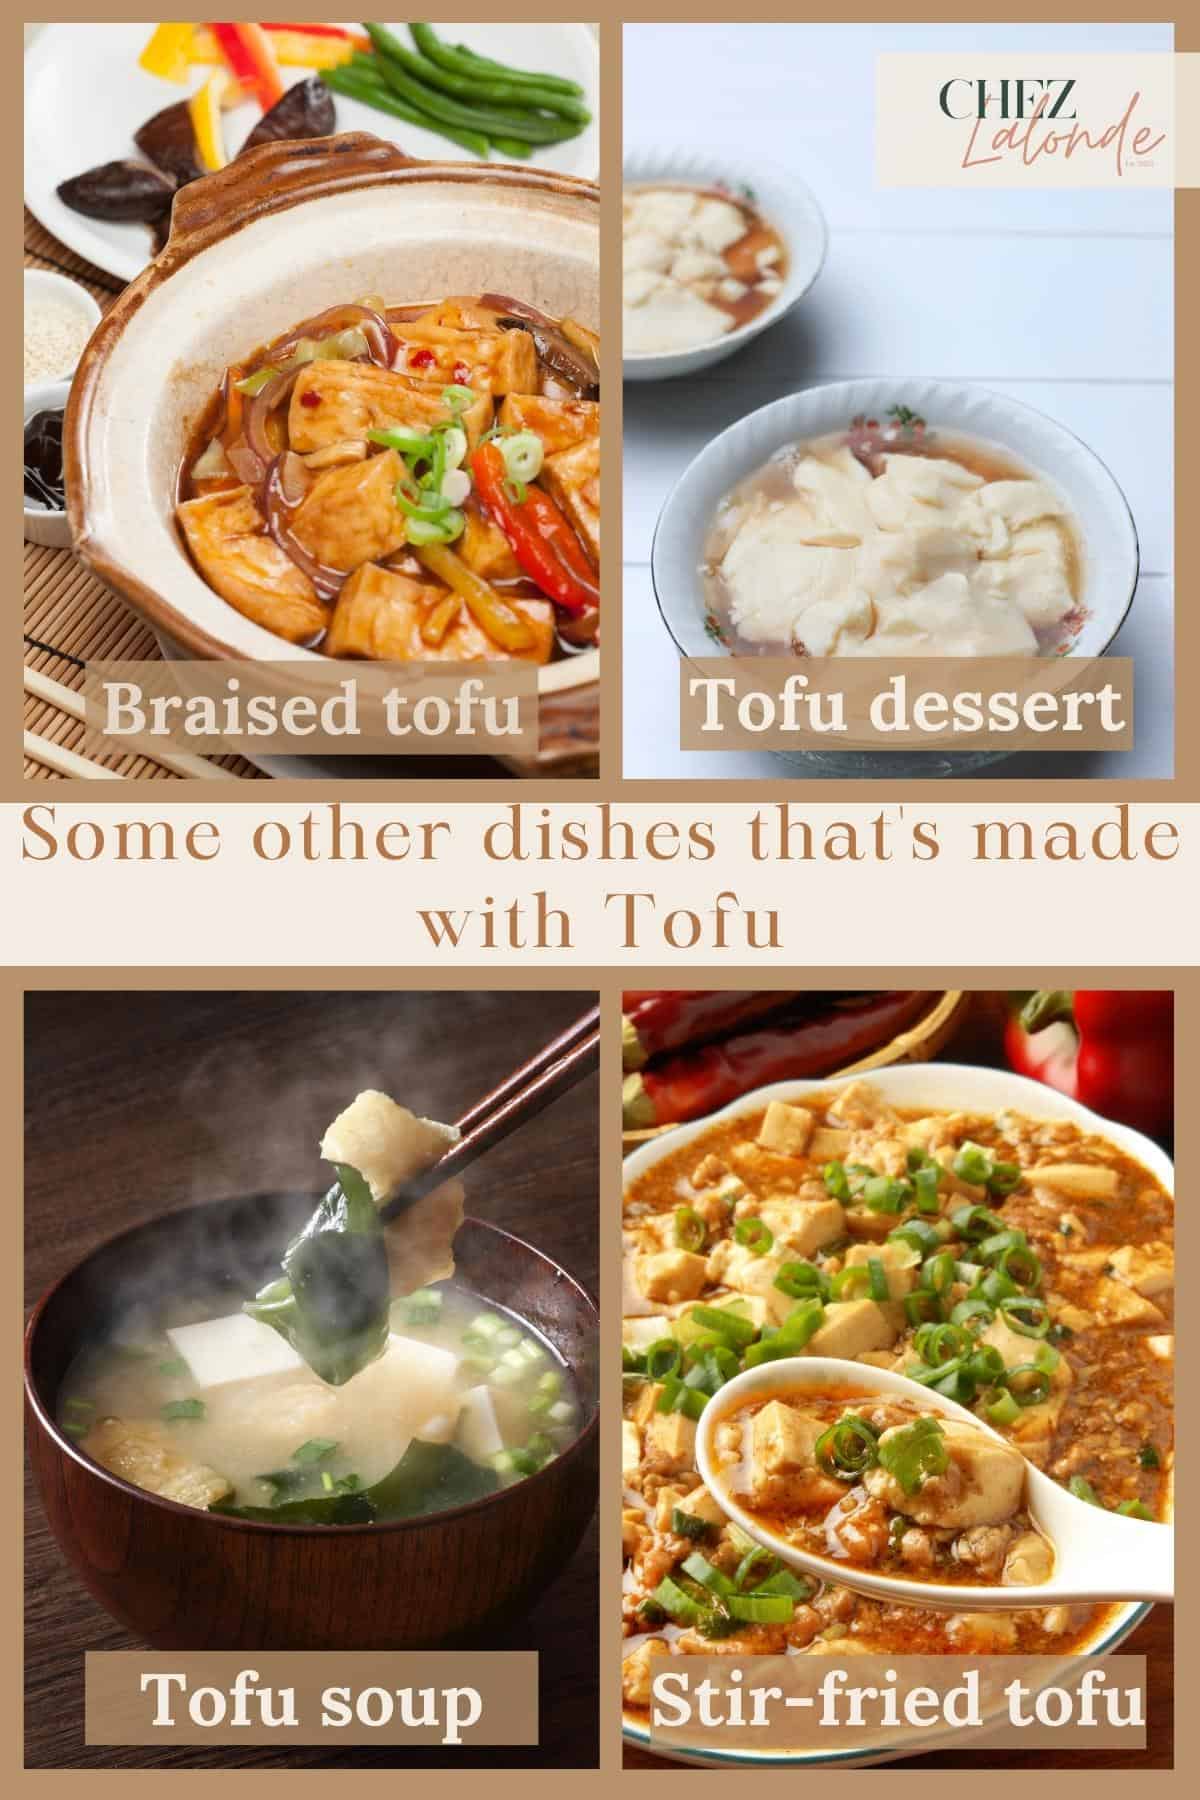 4 differents photos showcasing different cooking methods used with tofu.  We have braised, dessert, soup, and stir-fried methods.  